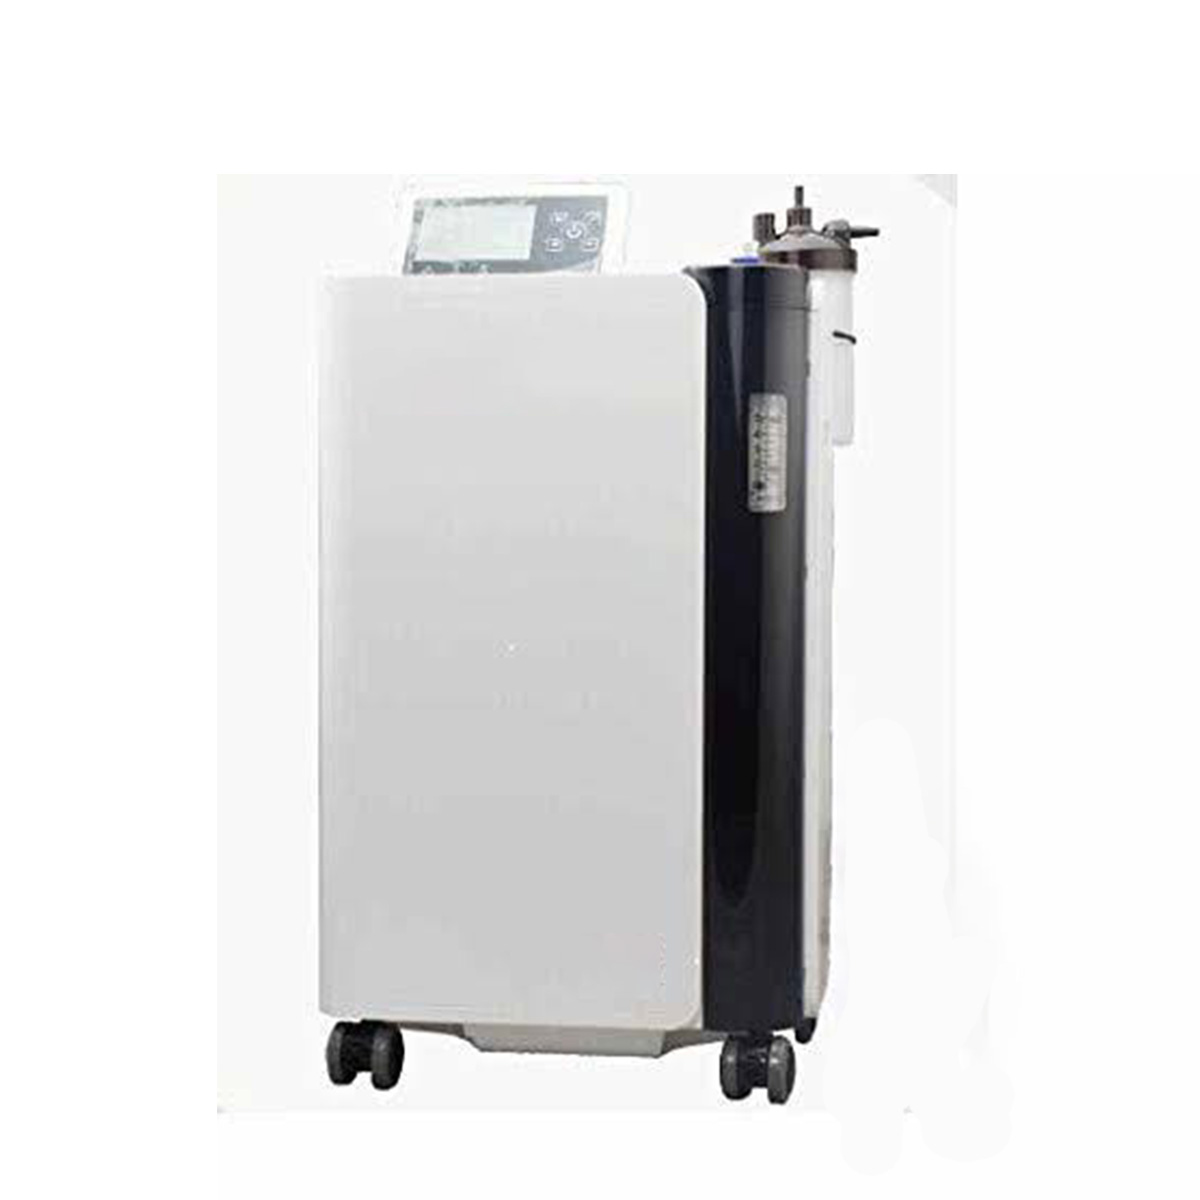 5 Lpm Oxymed Oxygen Concentrator On Sale Suppliers, Service Provider in Chittaranjan park